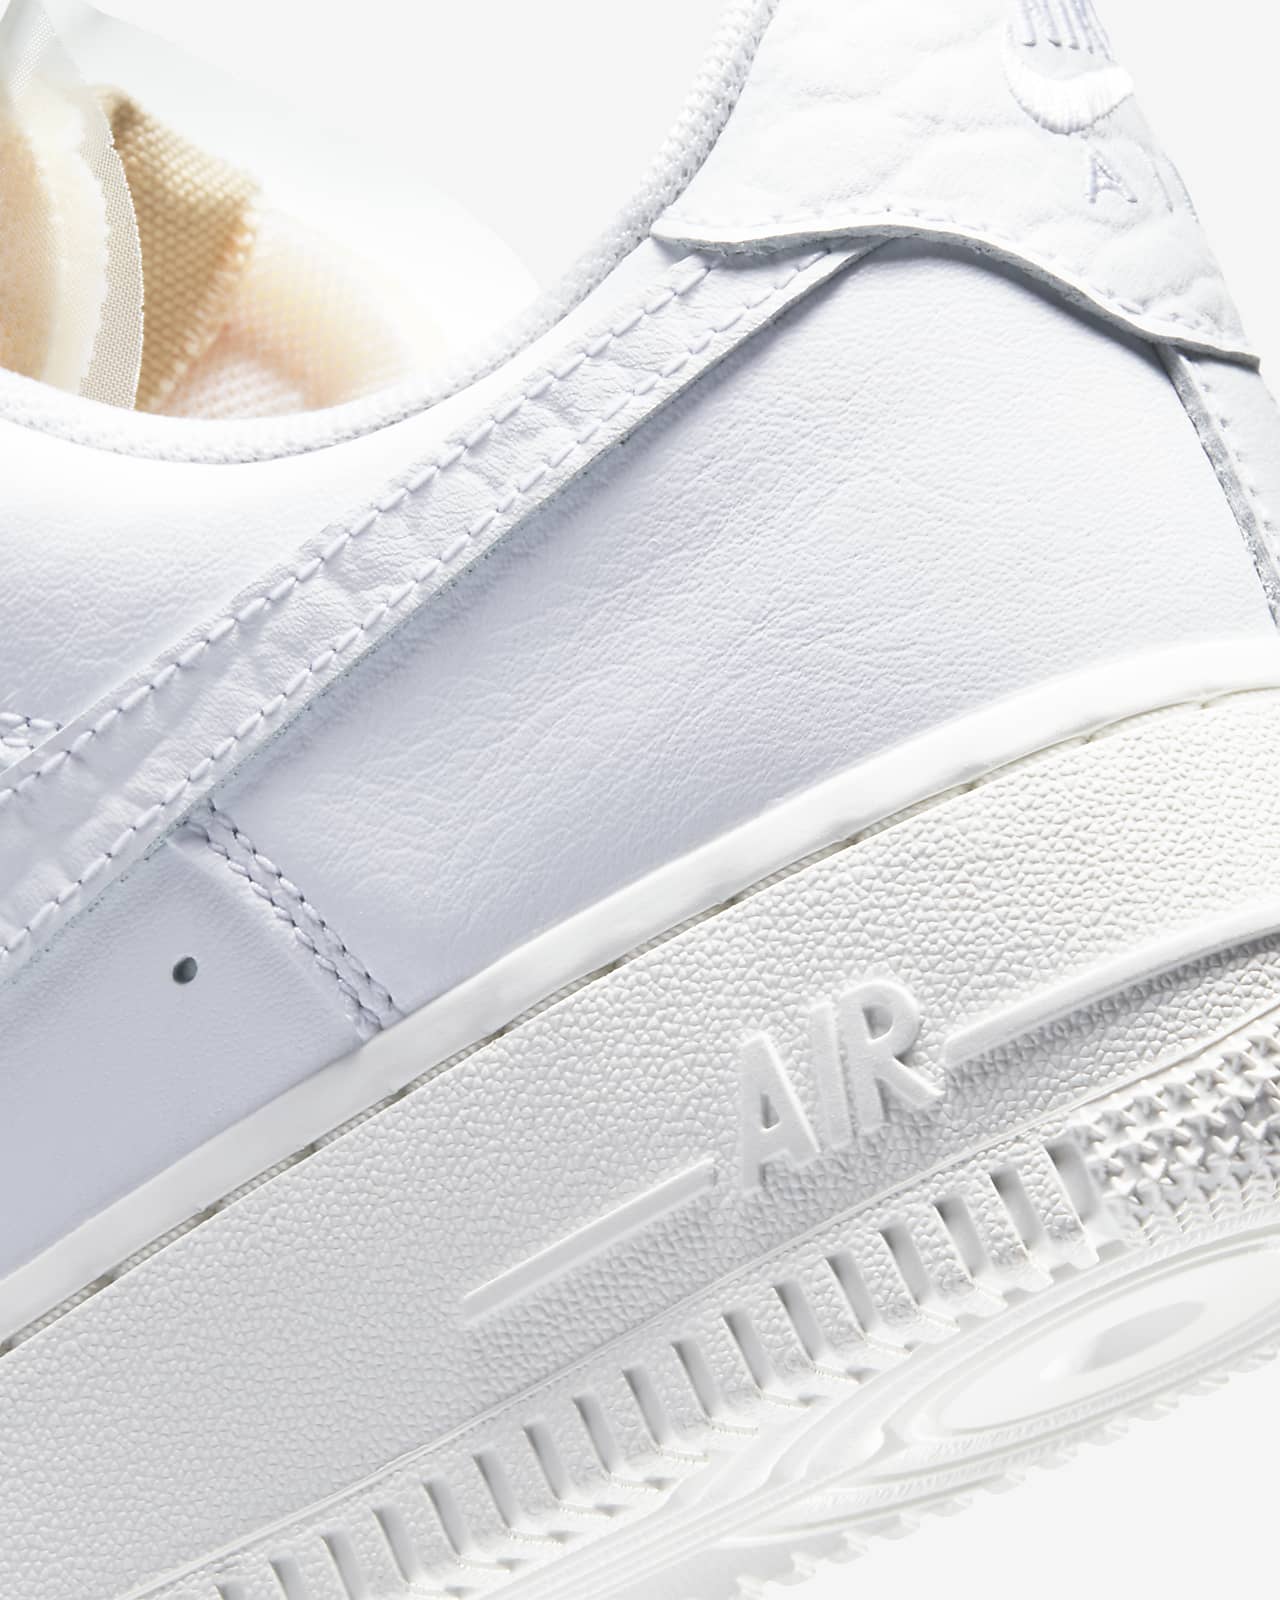 air force 1 low 07 lx bling